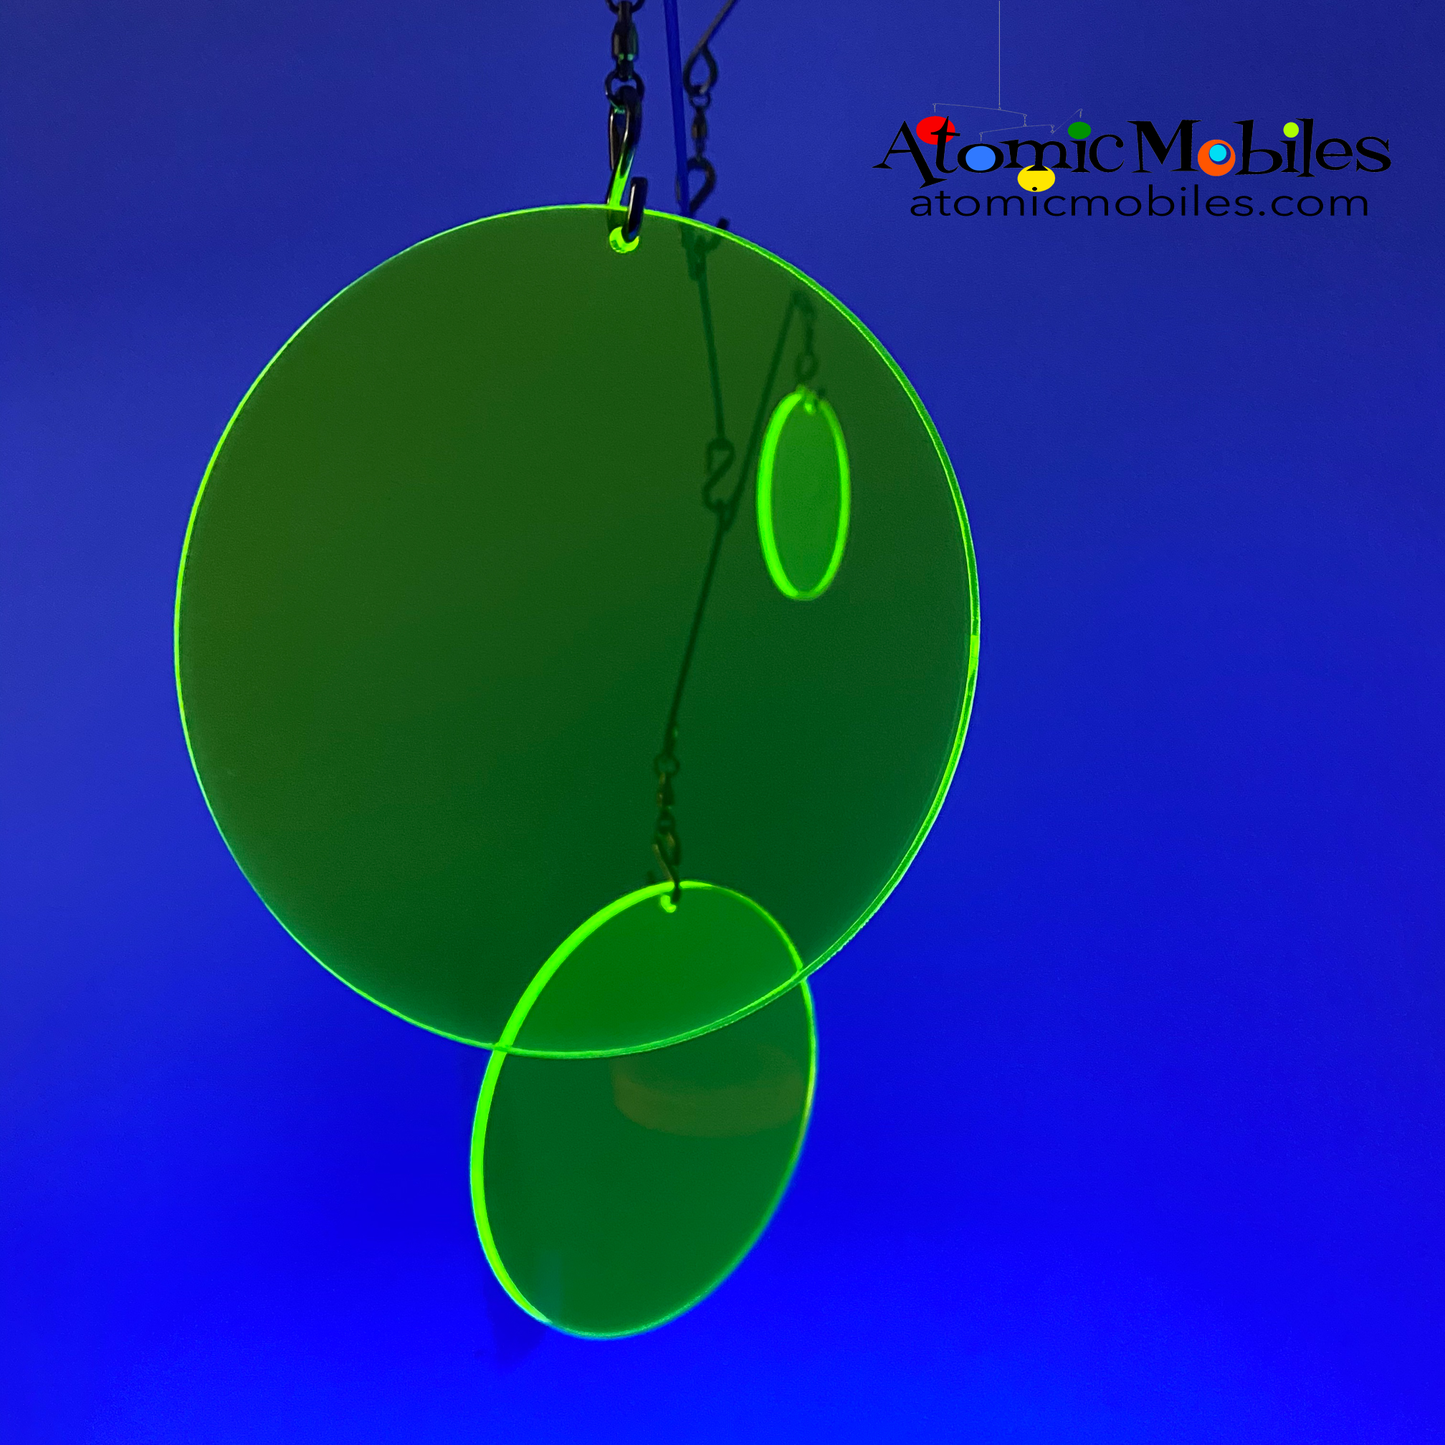 Neon Fluorescent Lime Green Atomic Mobile under black light -  hanging modern kinetic art mobiles by AtomicMobiles.com